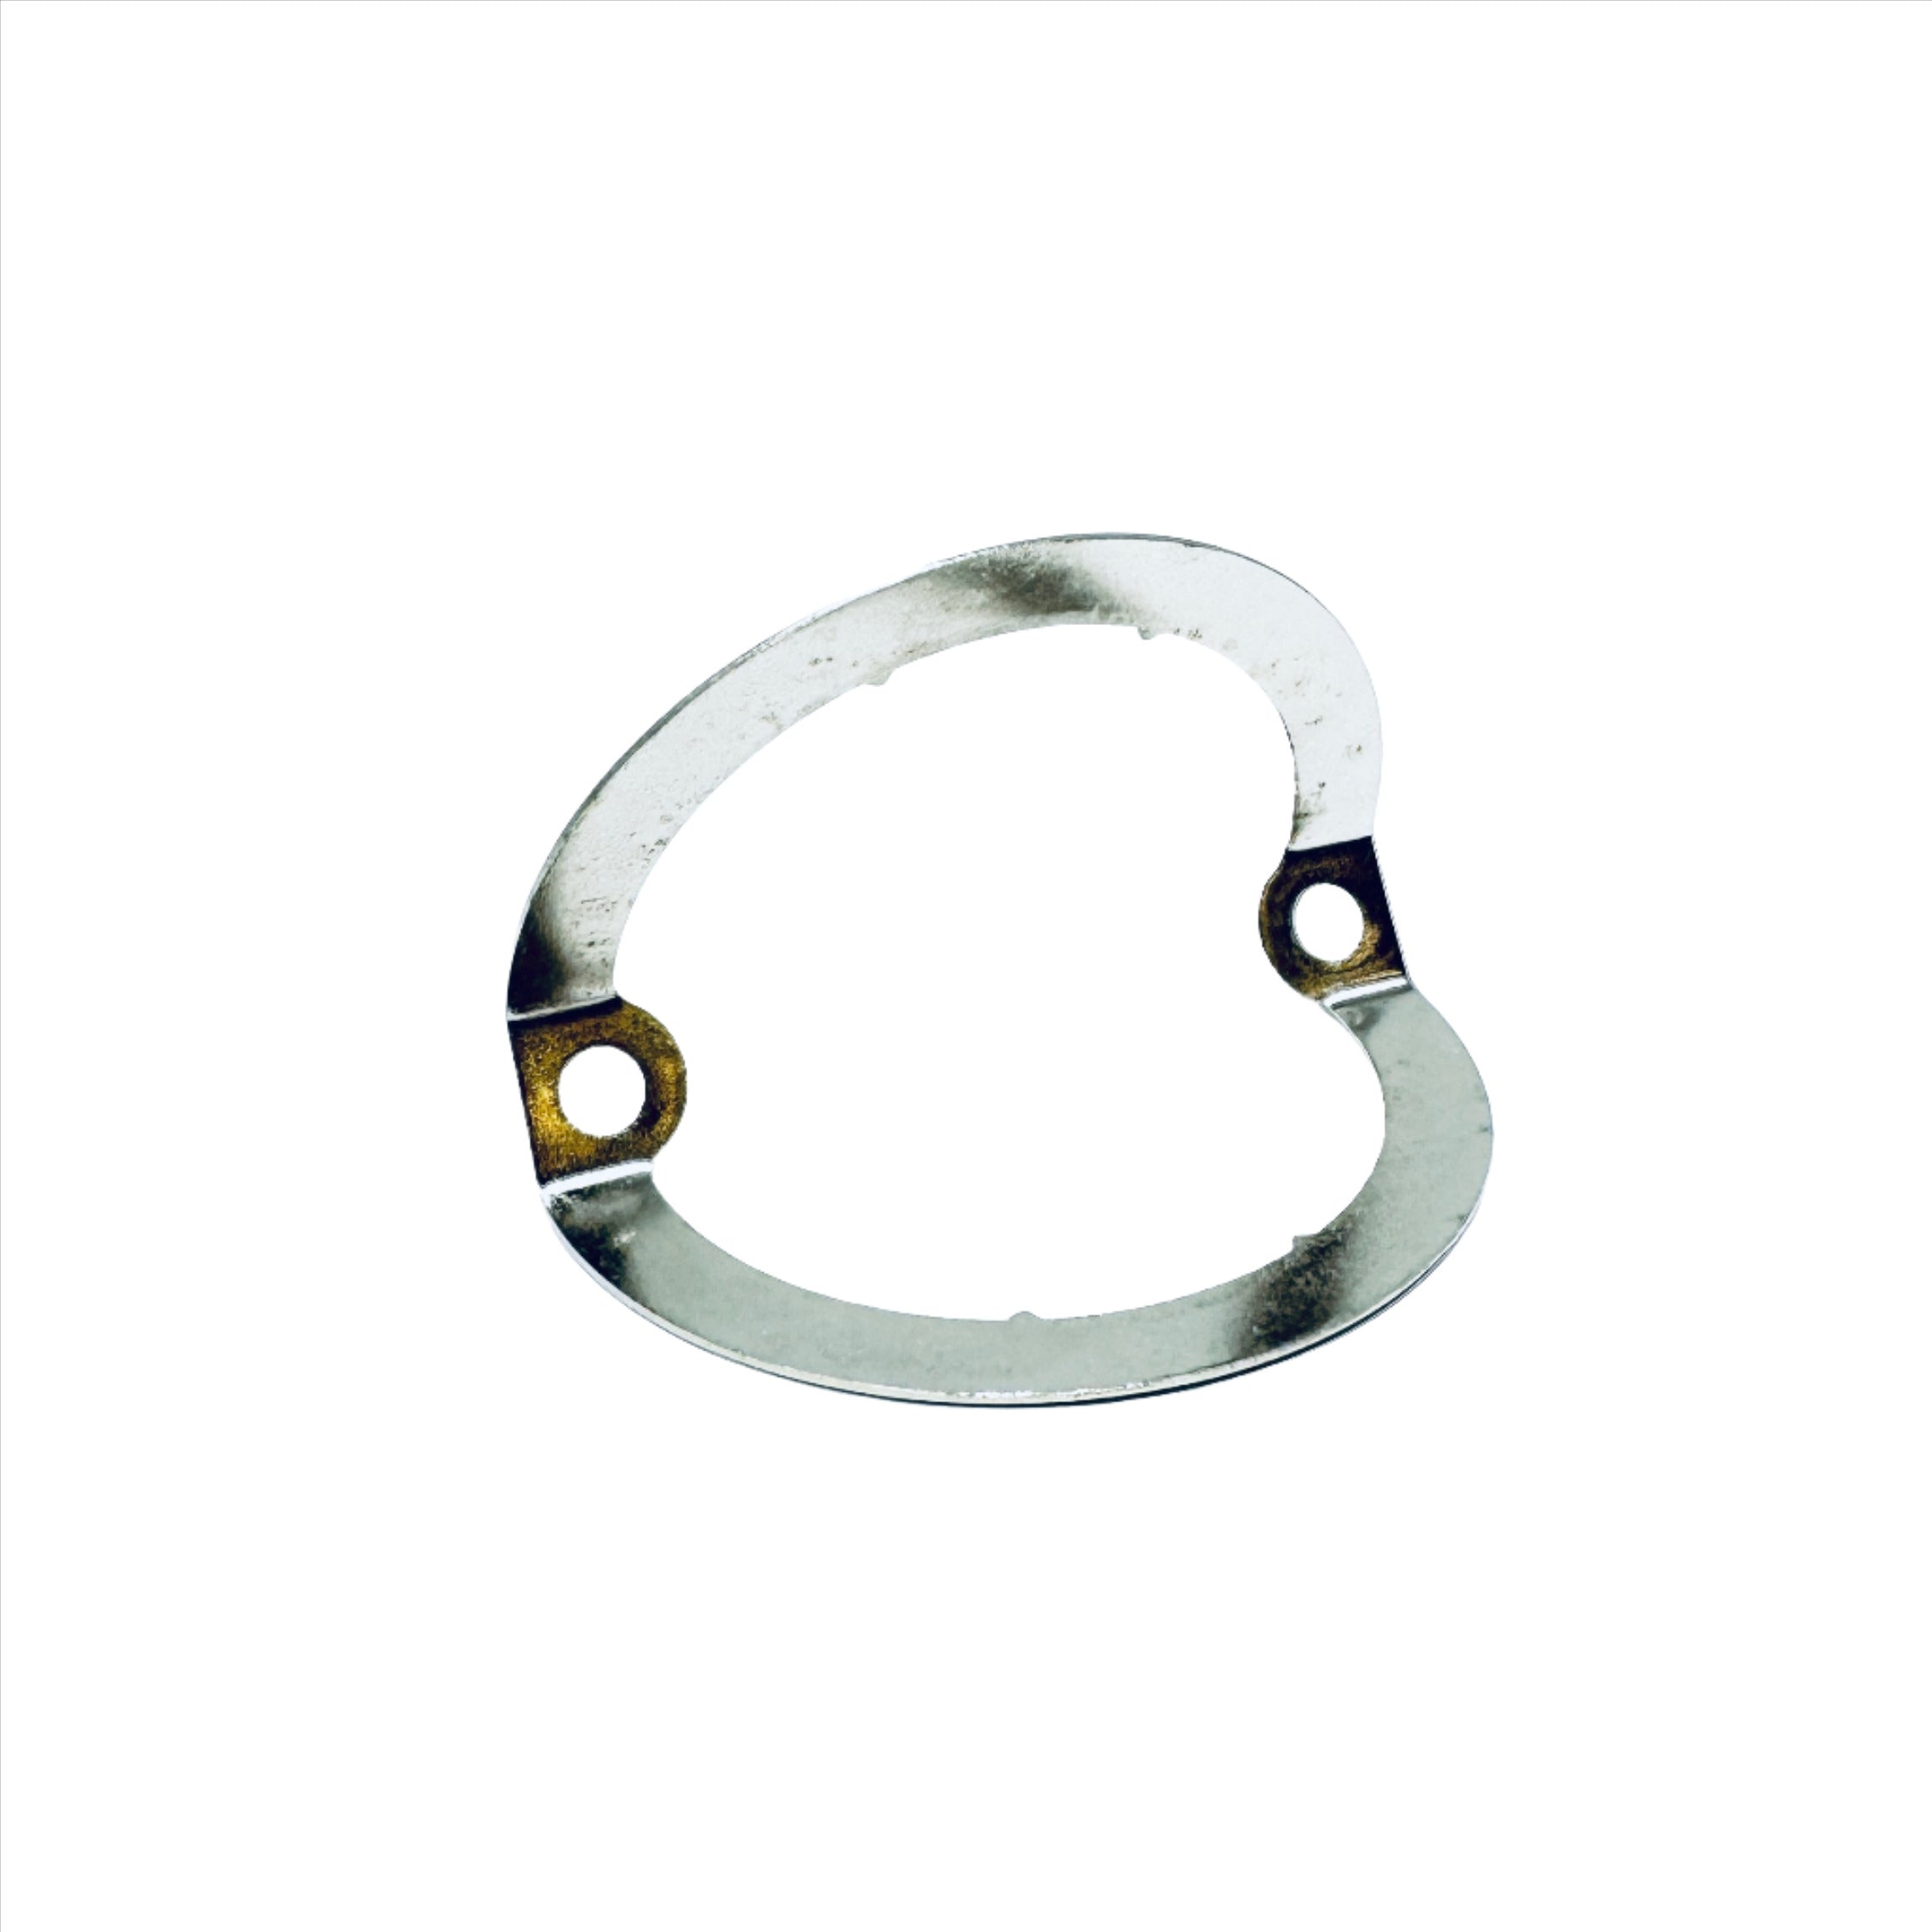 Power Tube clamp for amplifiers, secure tubes, ruby tube clamp with teeth